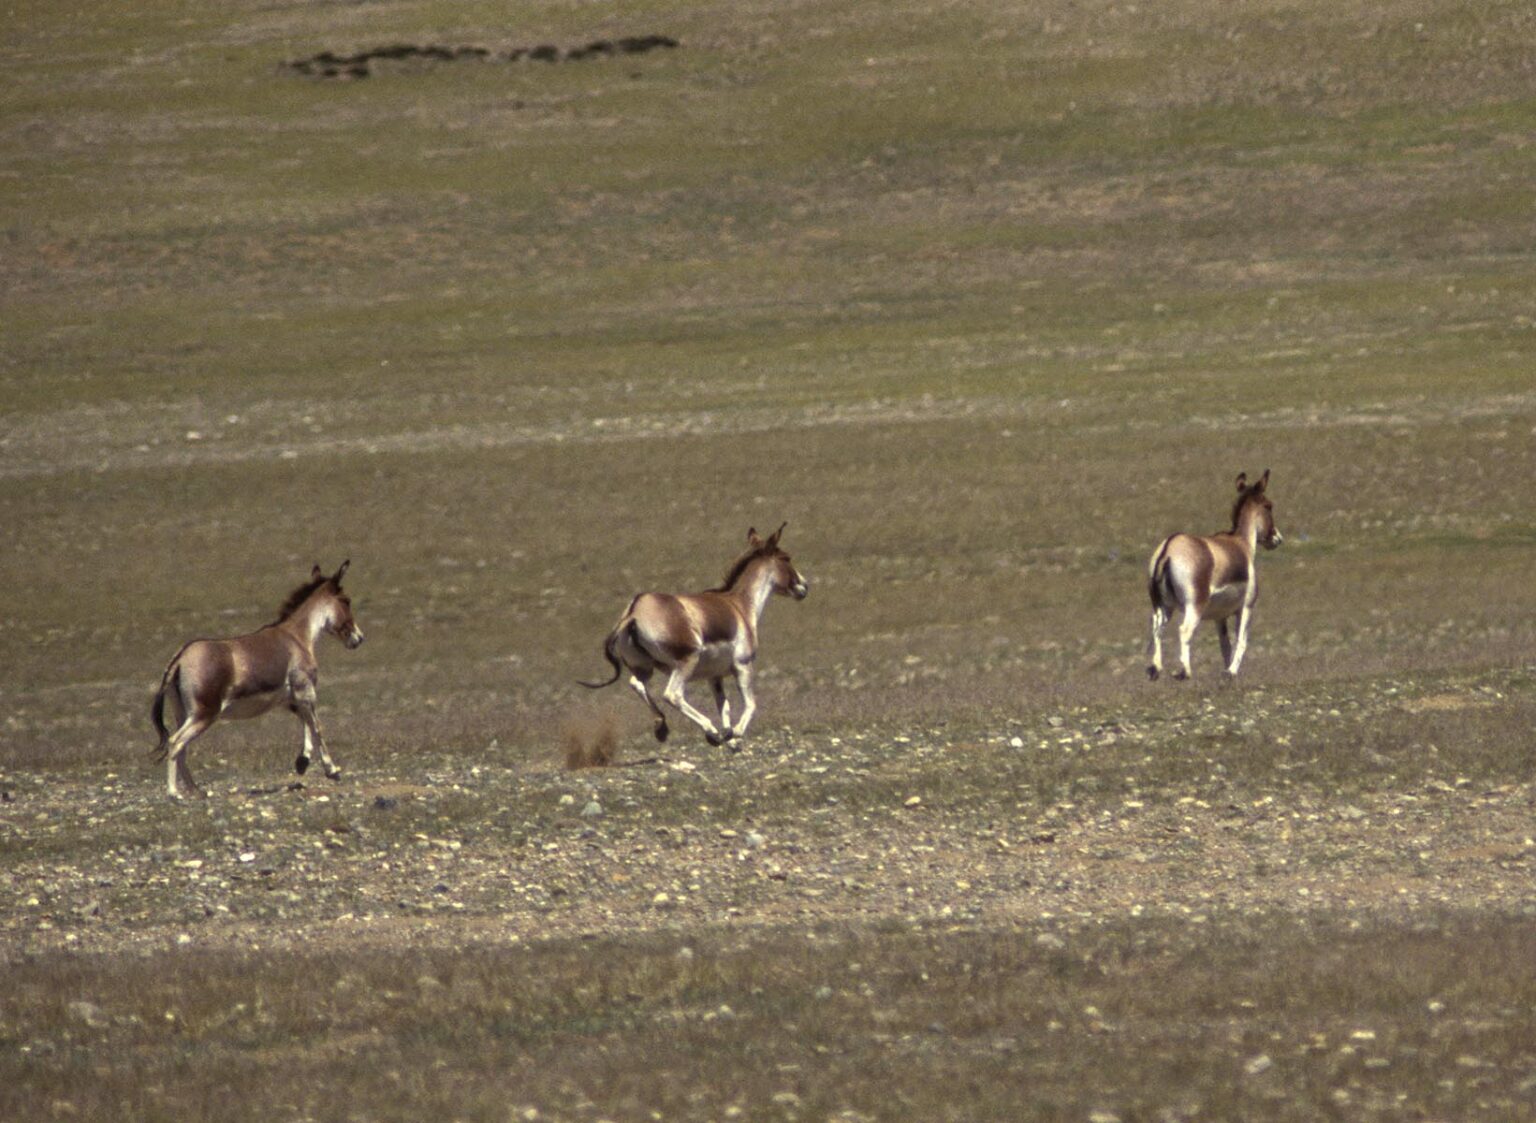 Three KIANG, the wild ass of TIBET, on the TIBETAN PLATEAU - road to MOUNT KAILASH in WESTERN TIBET